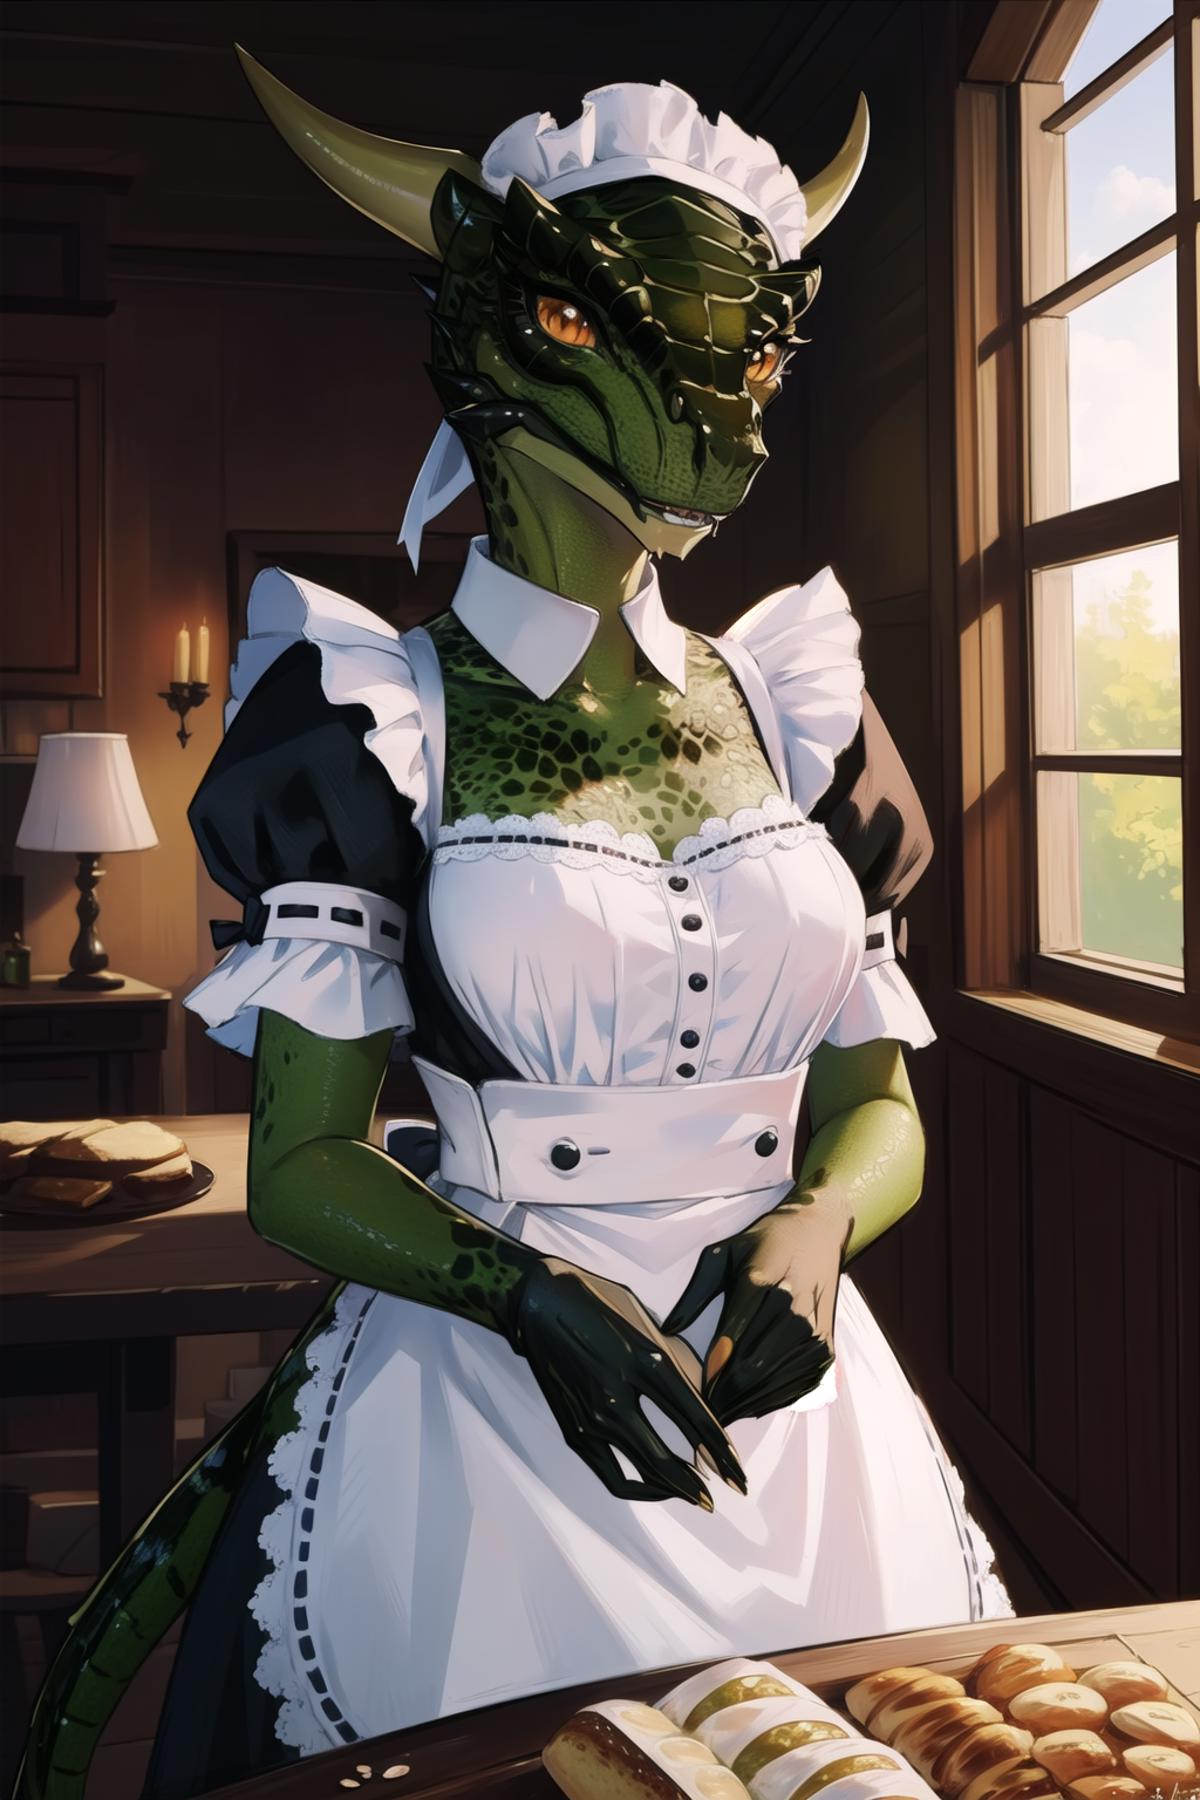 Lusty Argonian Maid (somewhat cursed) image by Wolfdua